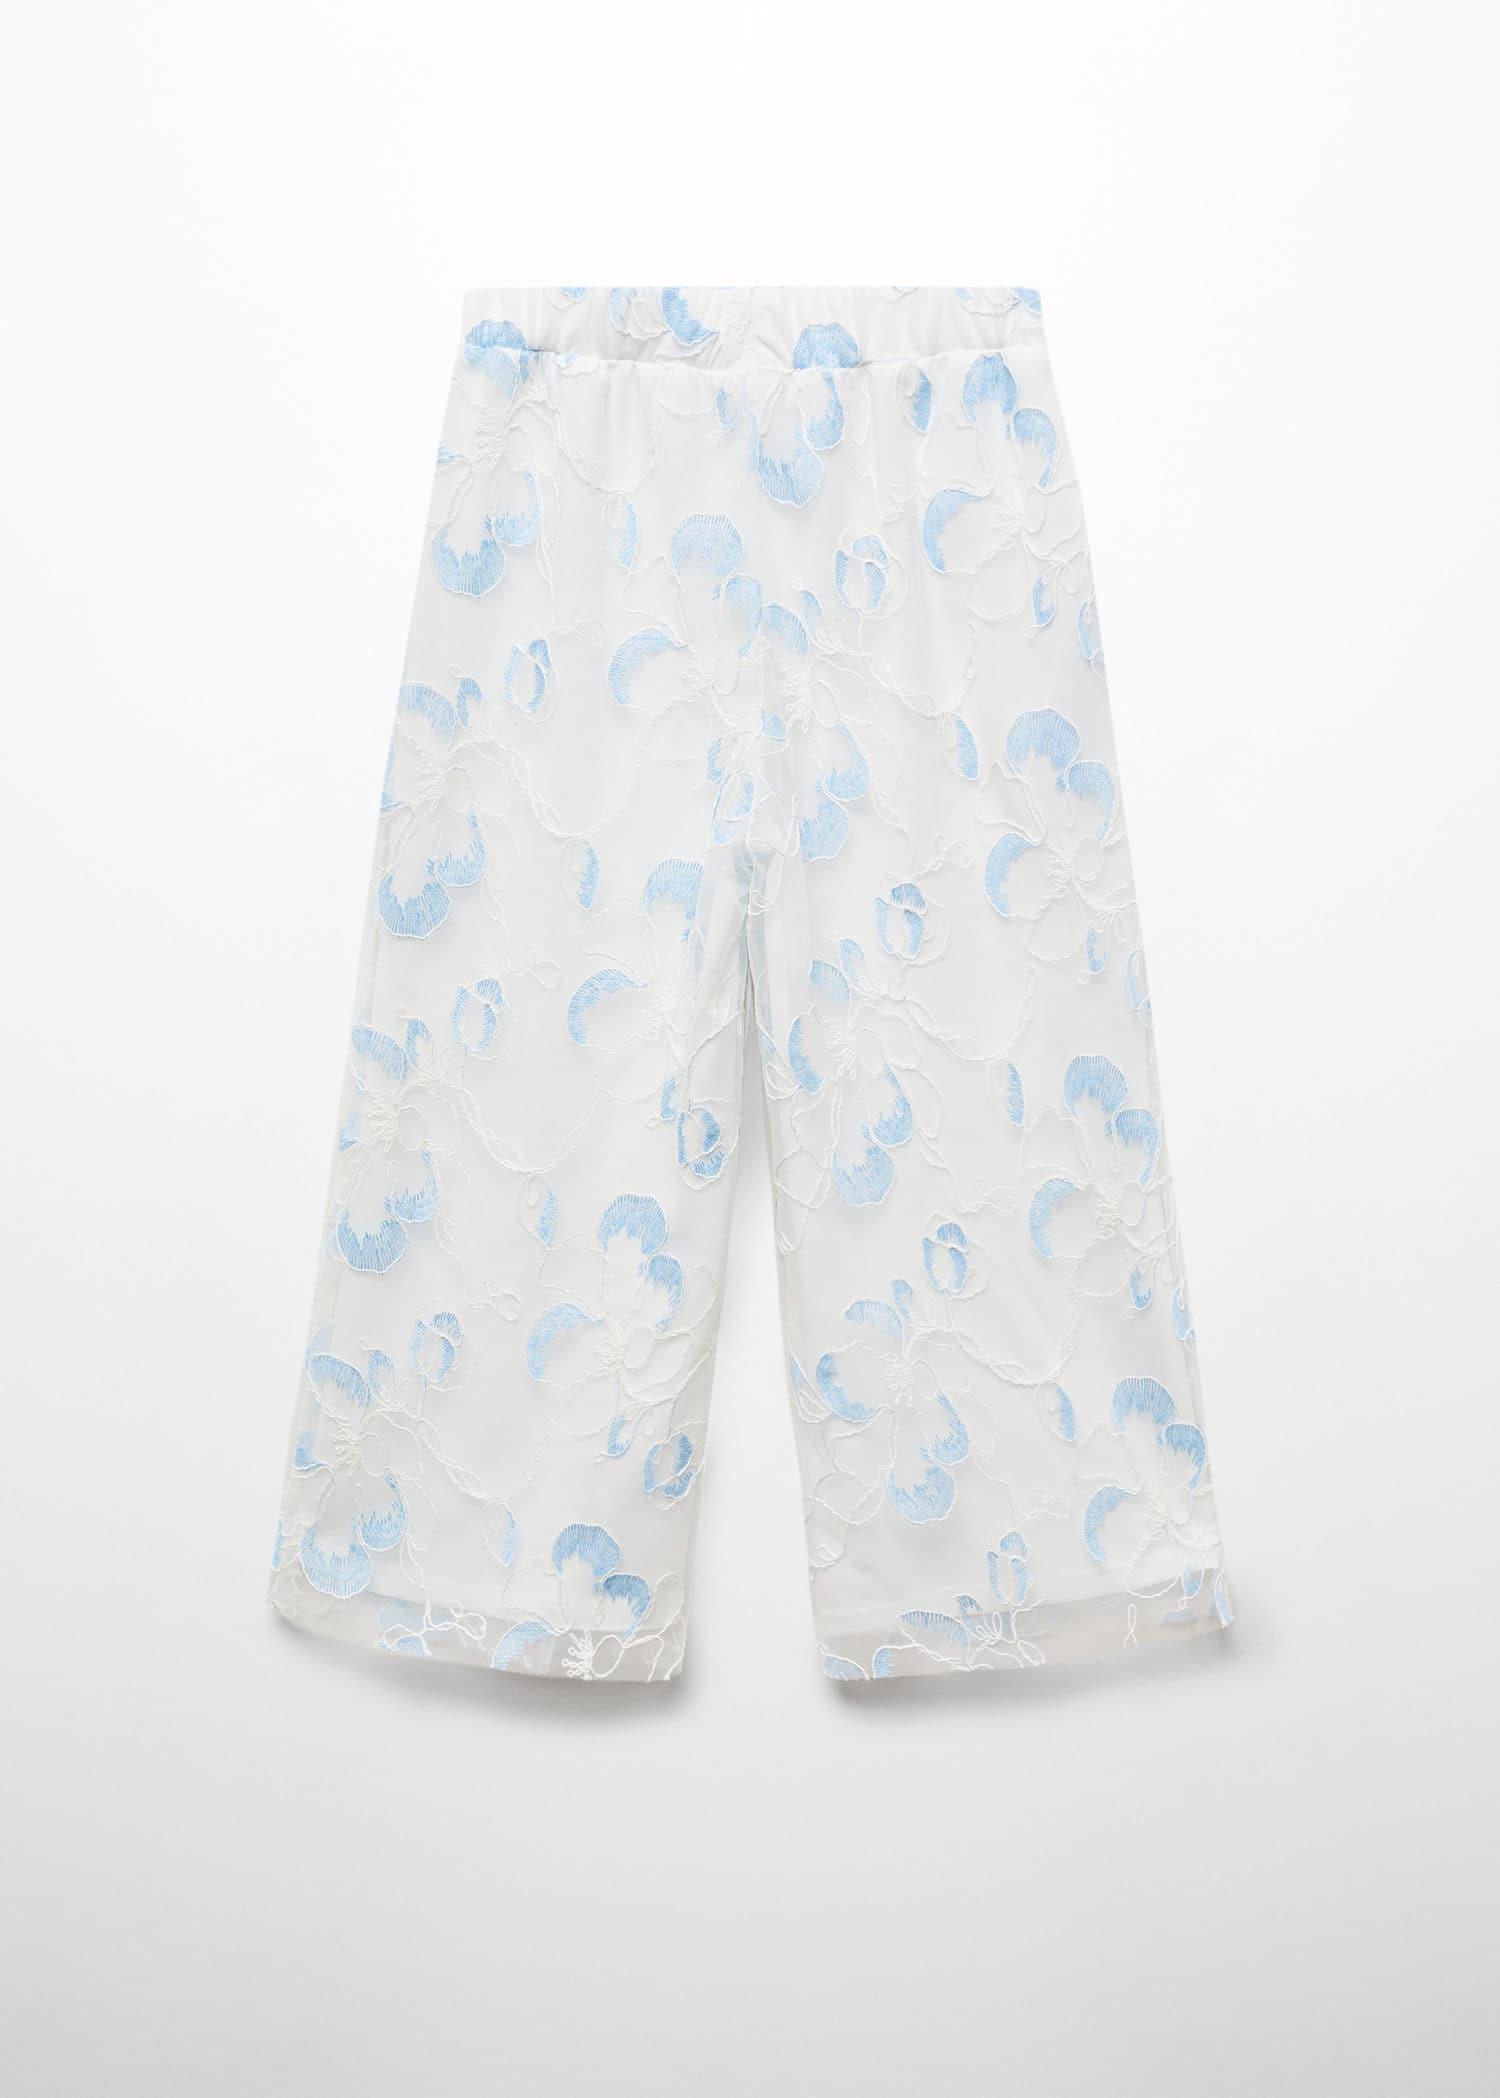 Mango - White Embroidered Tulle Pants, Kids Girls